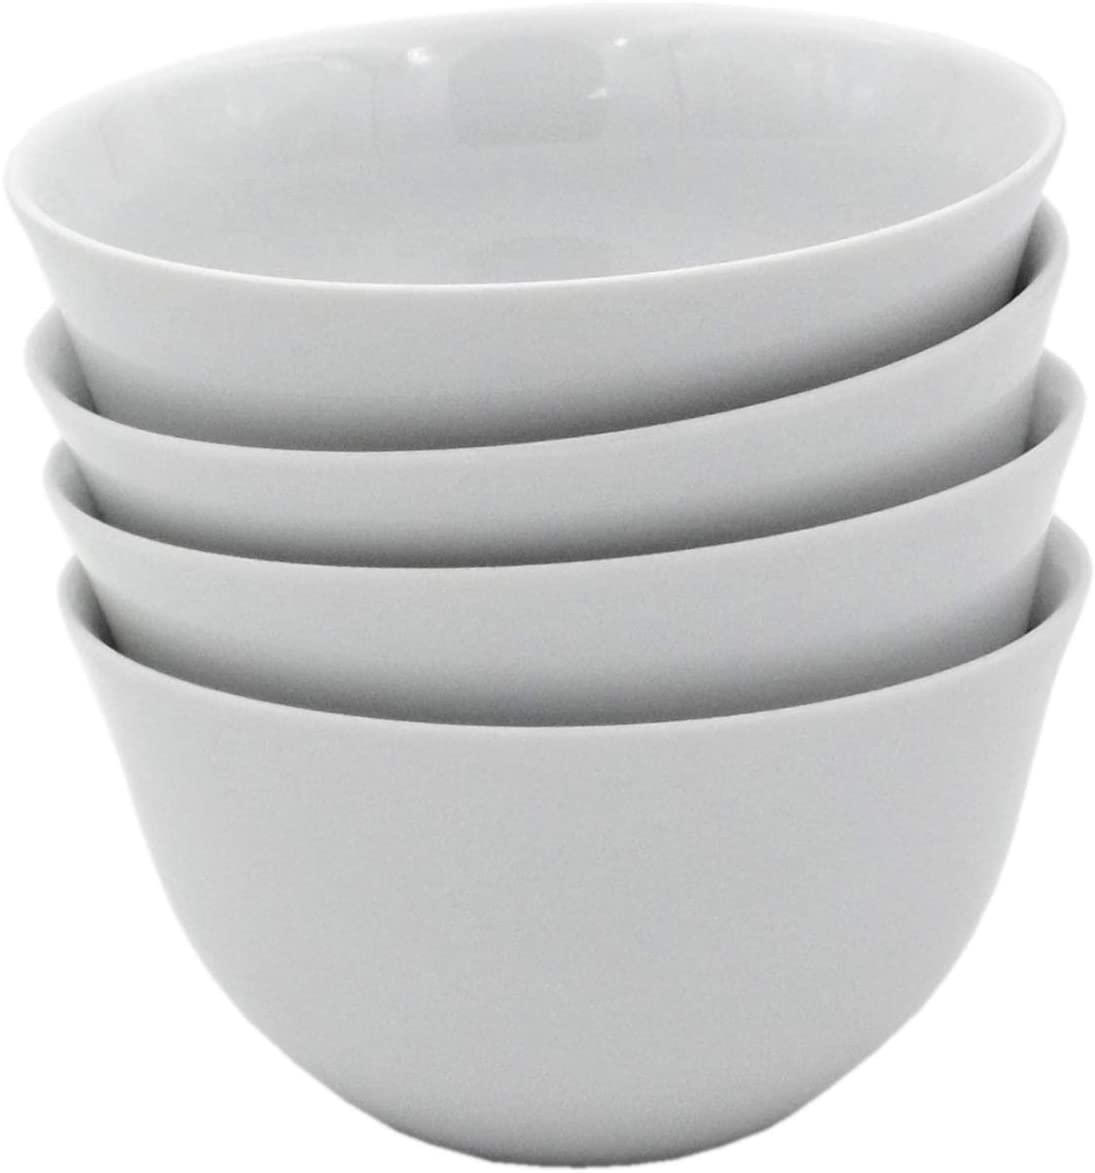 Kahla Update 32A238A90032C Cereal Bowl Set for 4 People 500 ml Round Porcelain Soup Bowl Ice Bowl Salad White